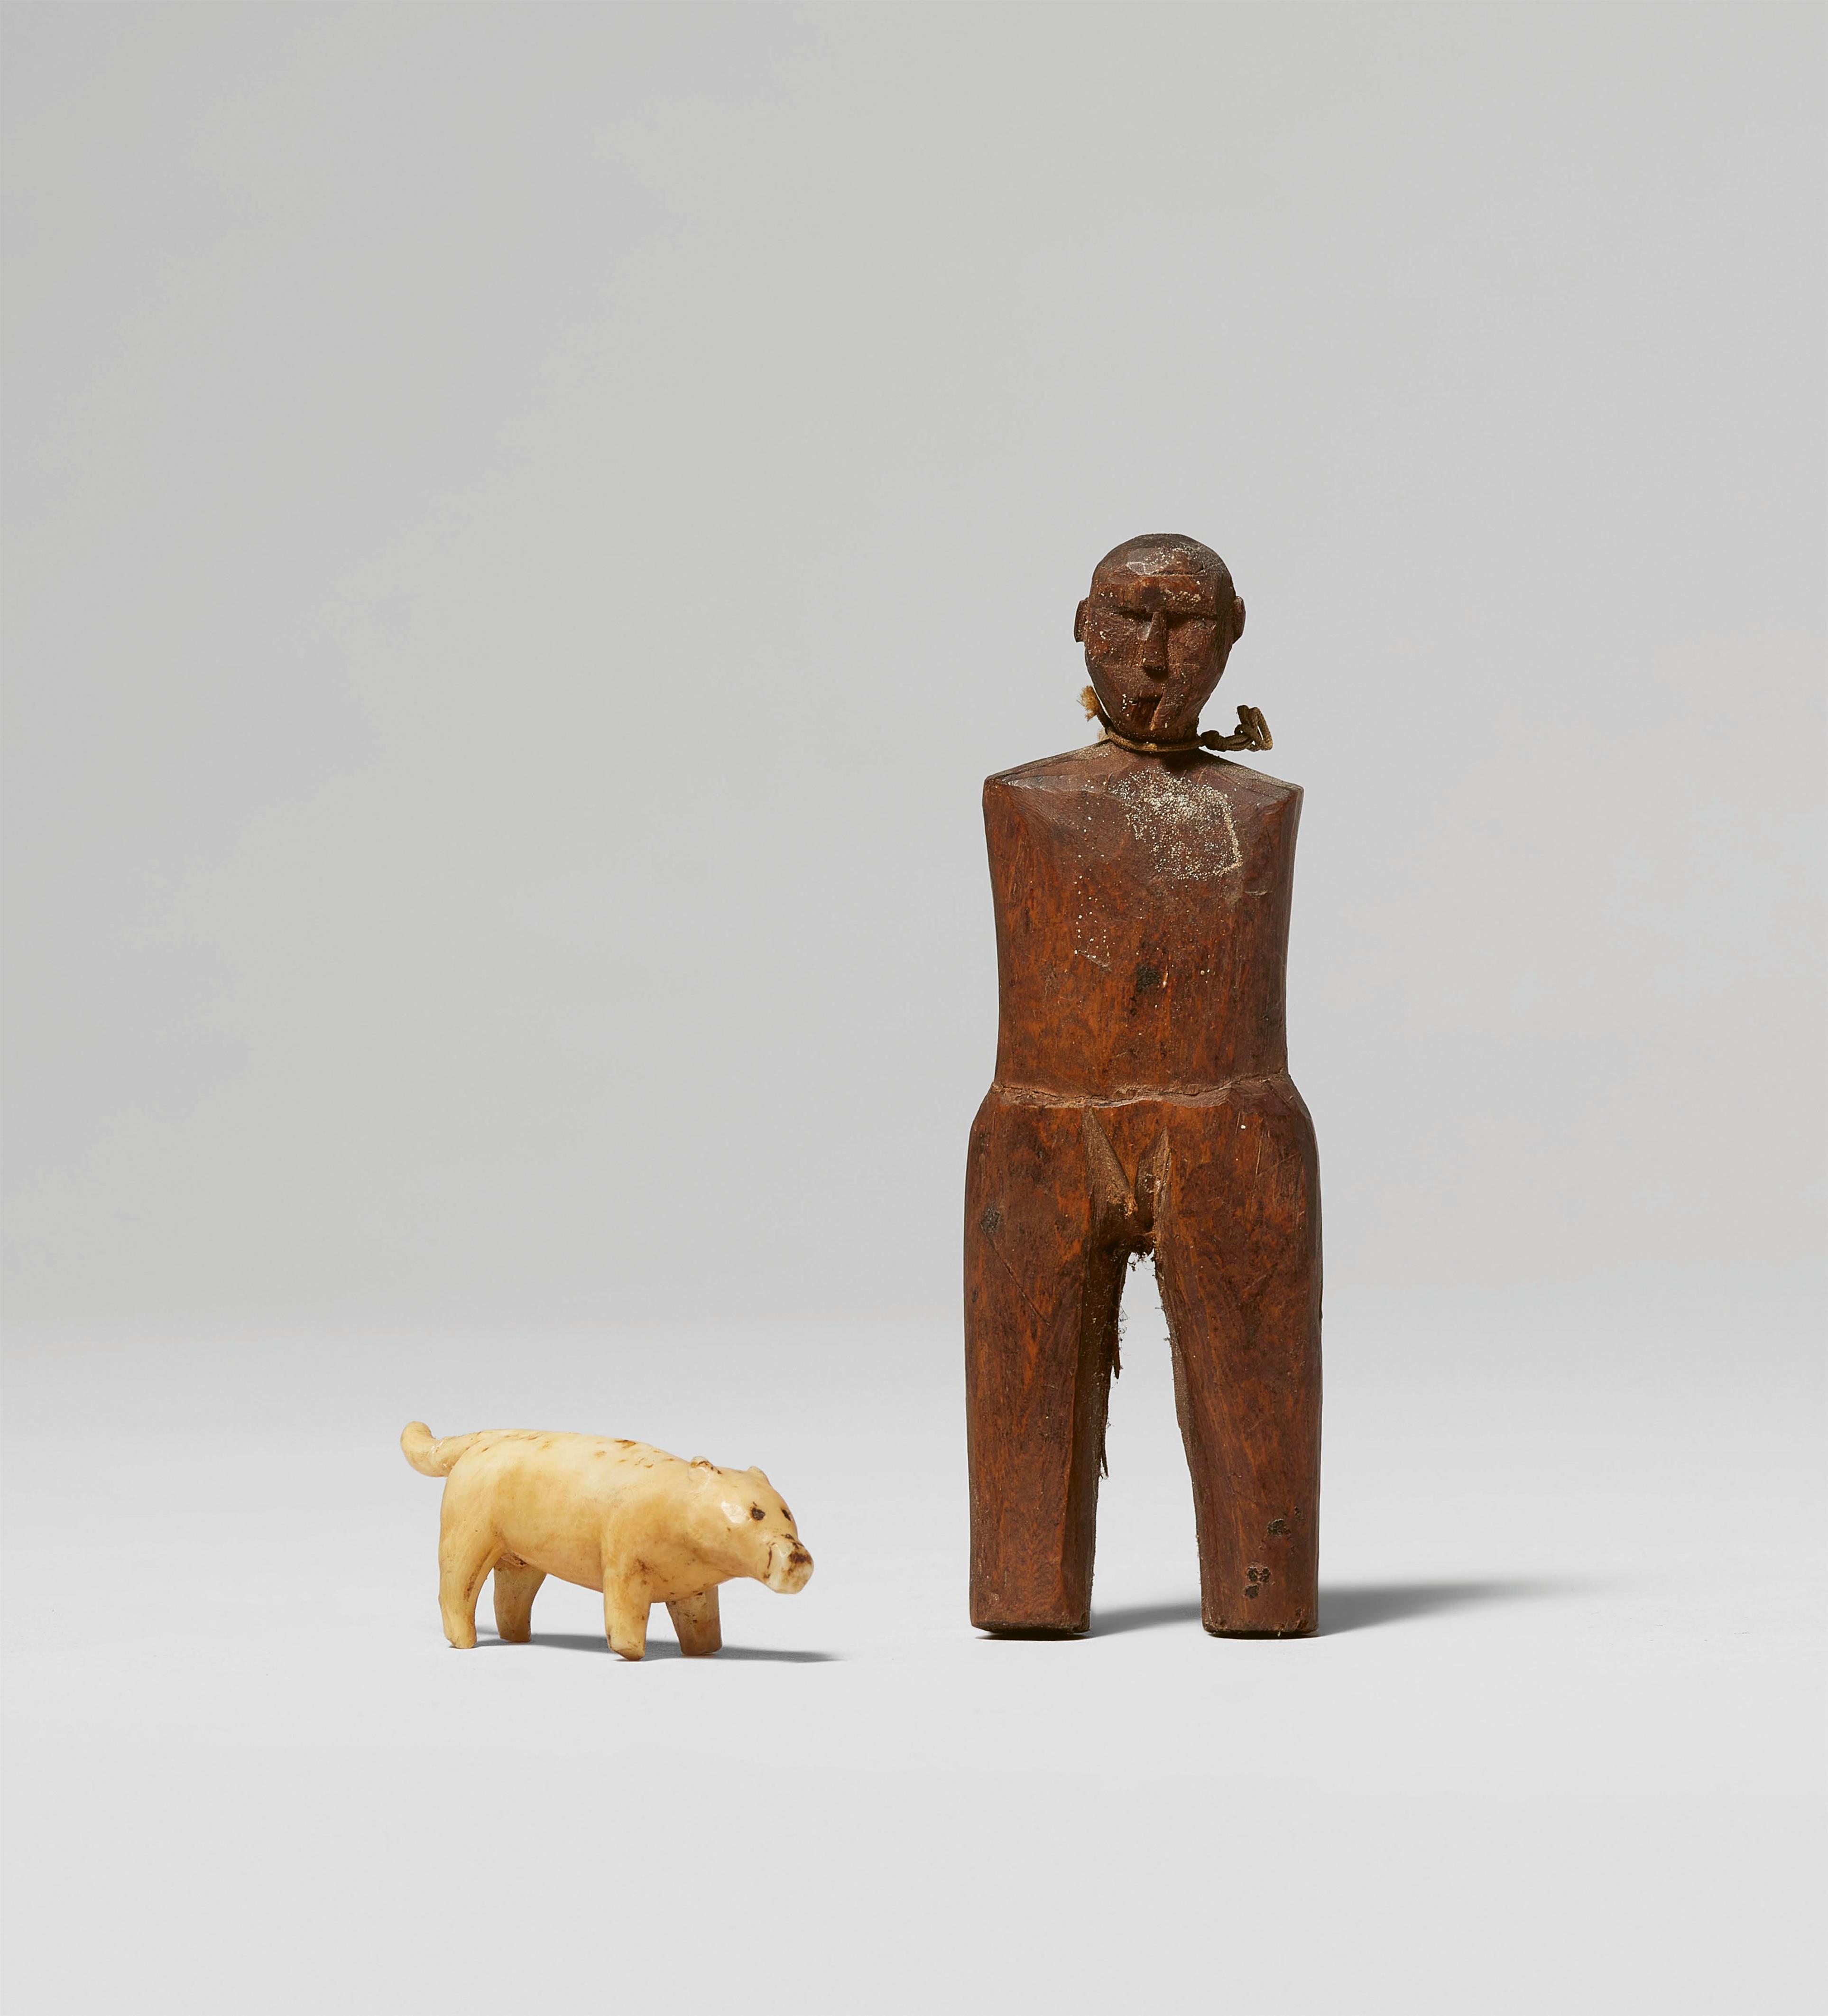 FIVE INUIT ARTEFACTS
Three harpoon points; a wood figure and a small ivory dog - image-1